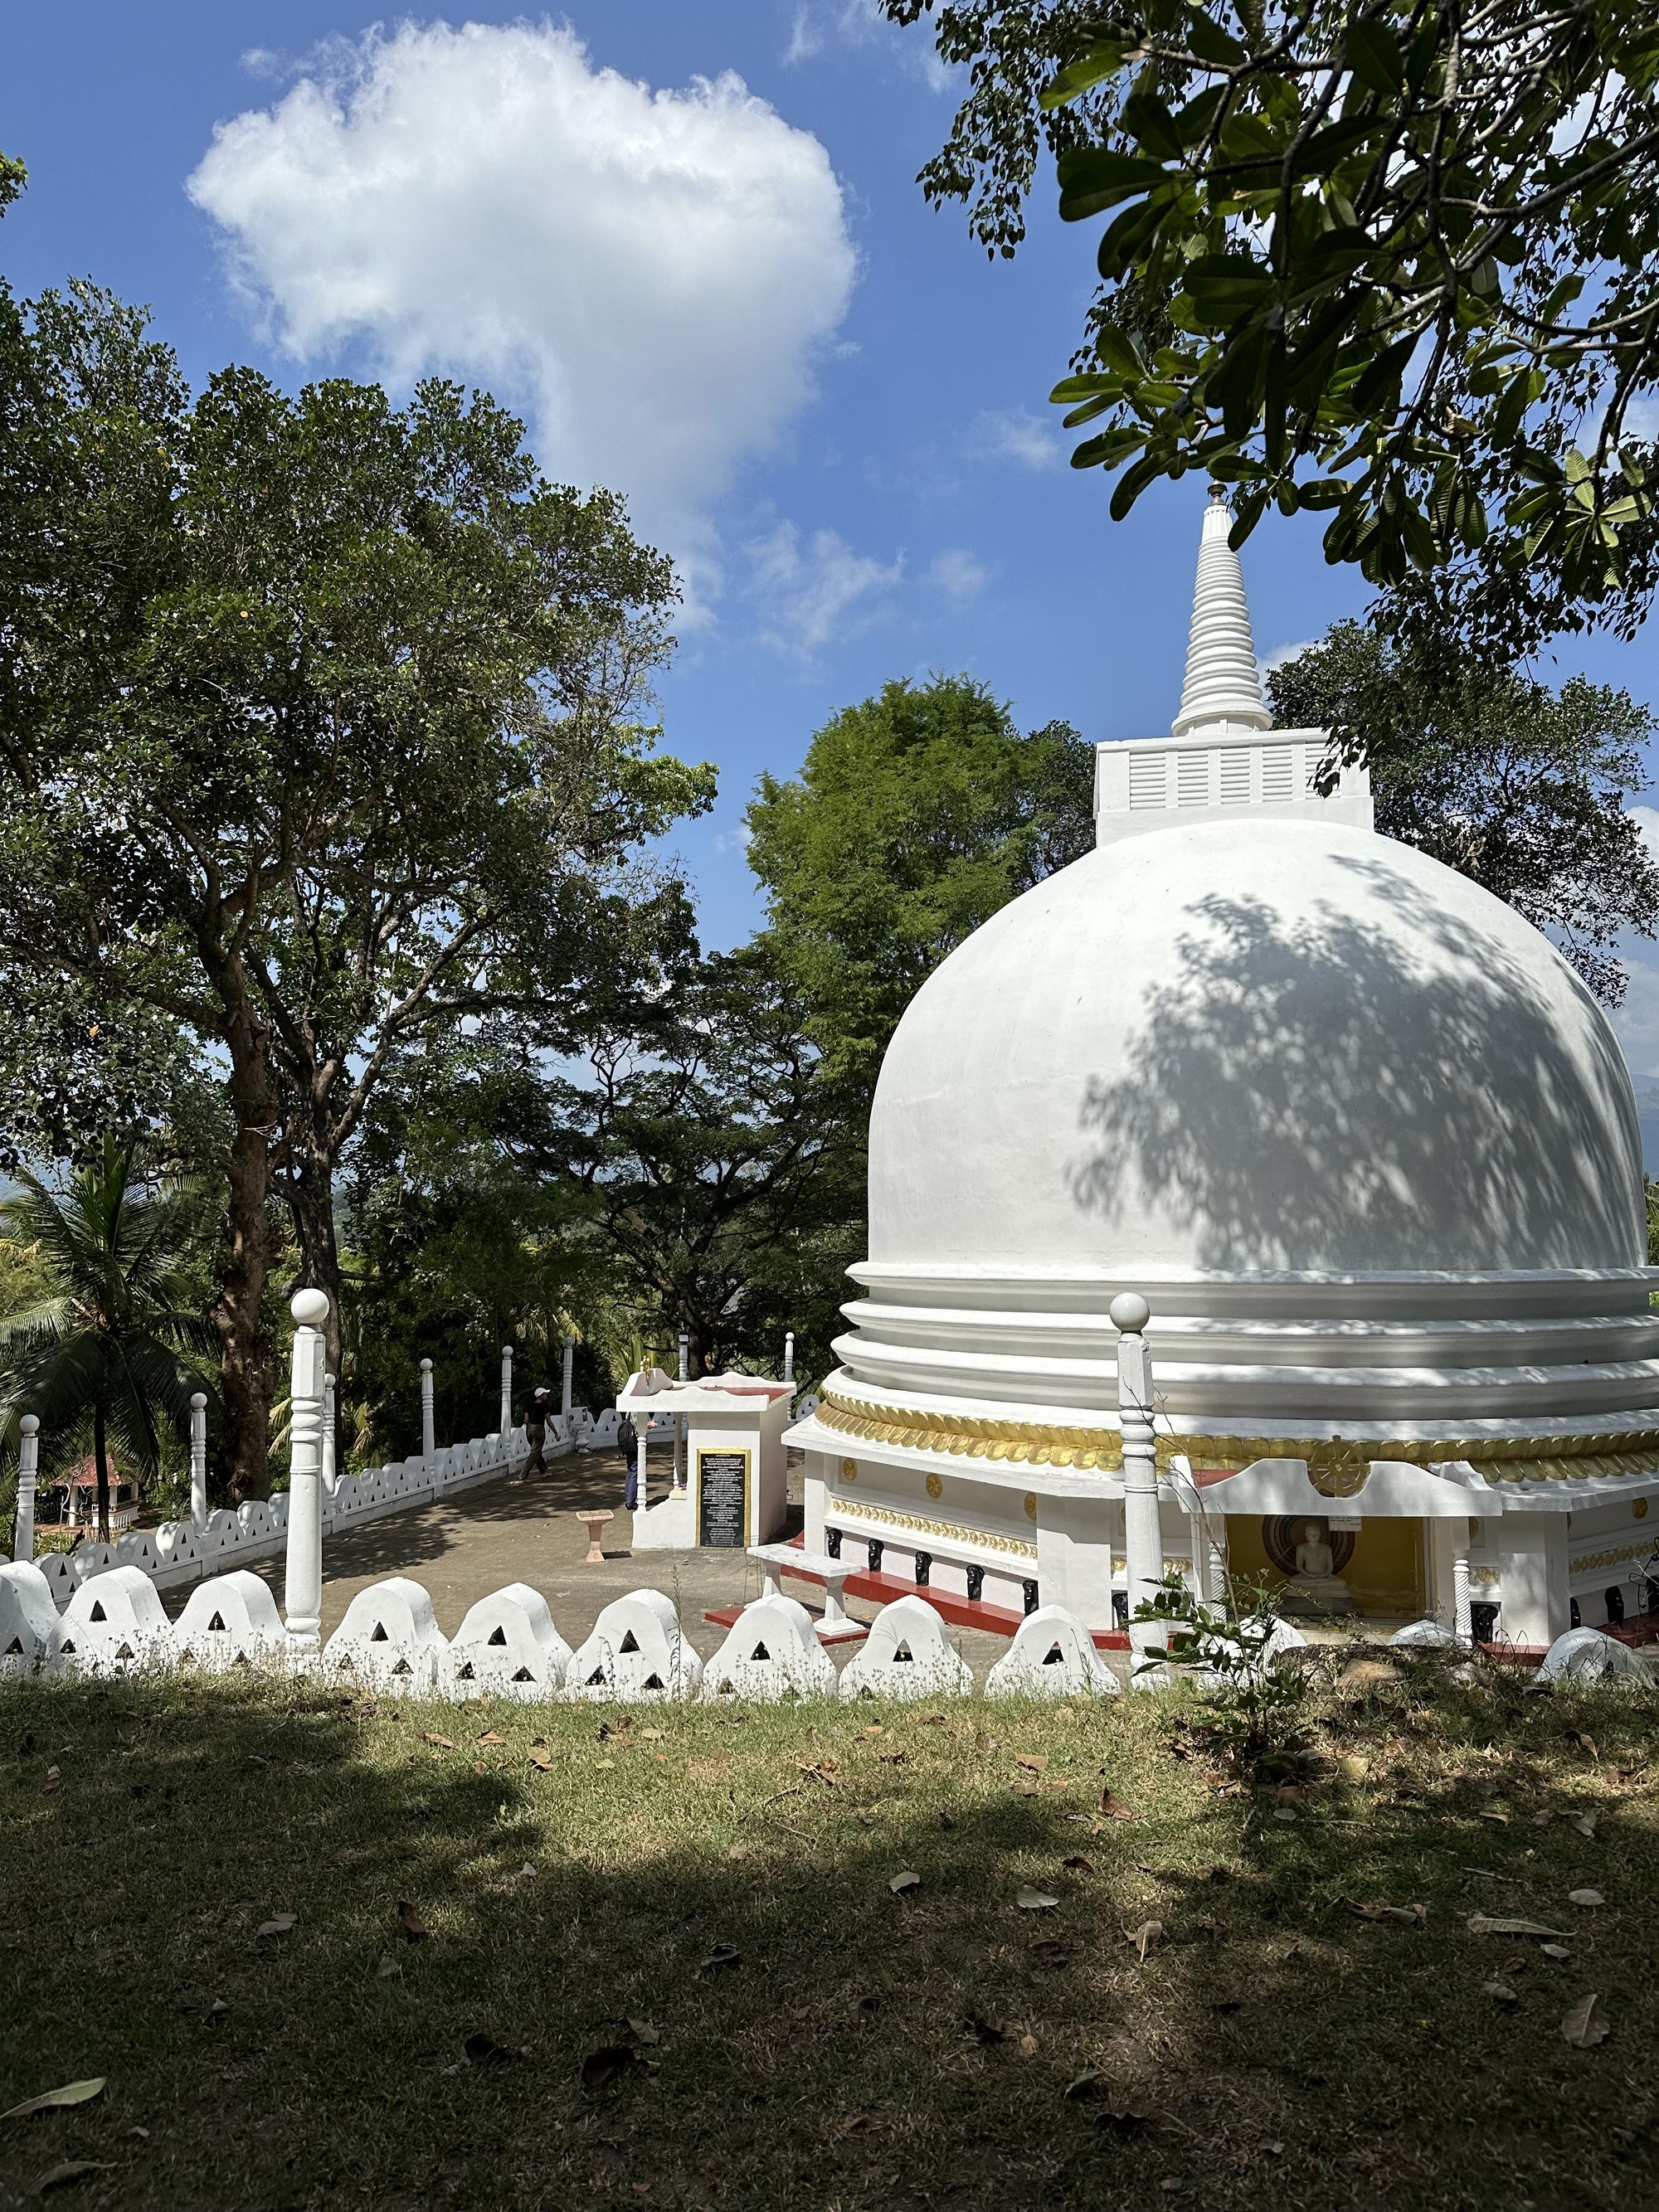 The largest stupa at the Matale Aluviharaya rock cave temple in Sri Lanka